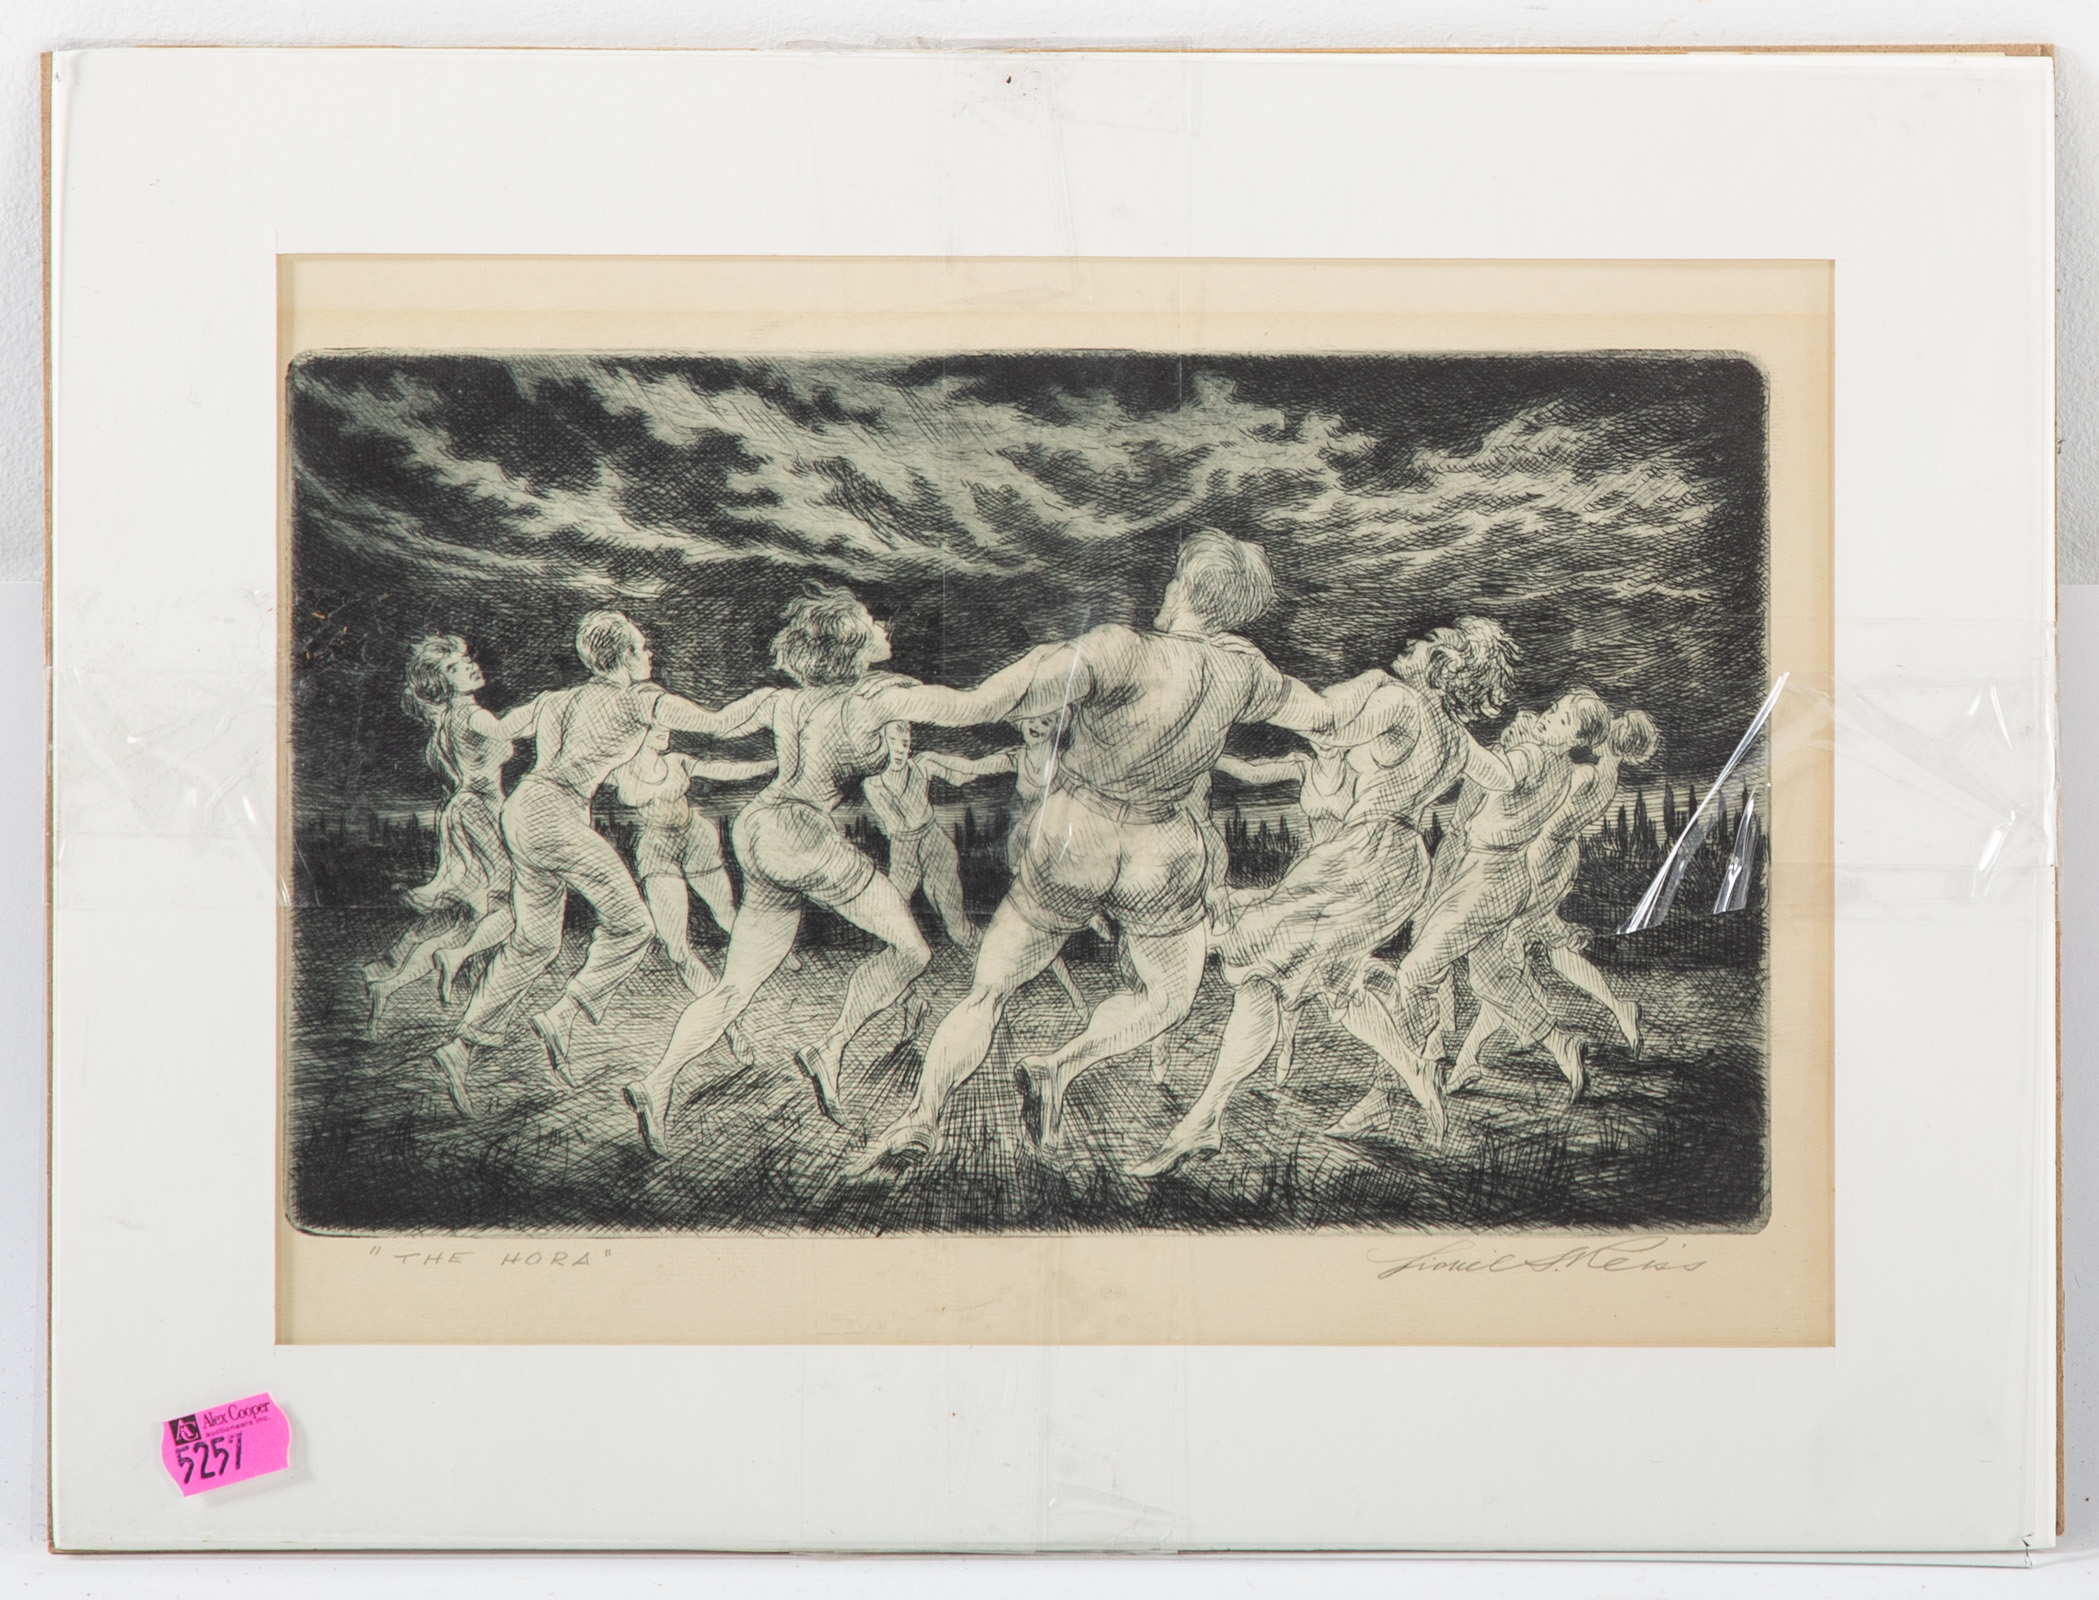 LIONEL REISS. "THE HORA," ETCHING